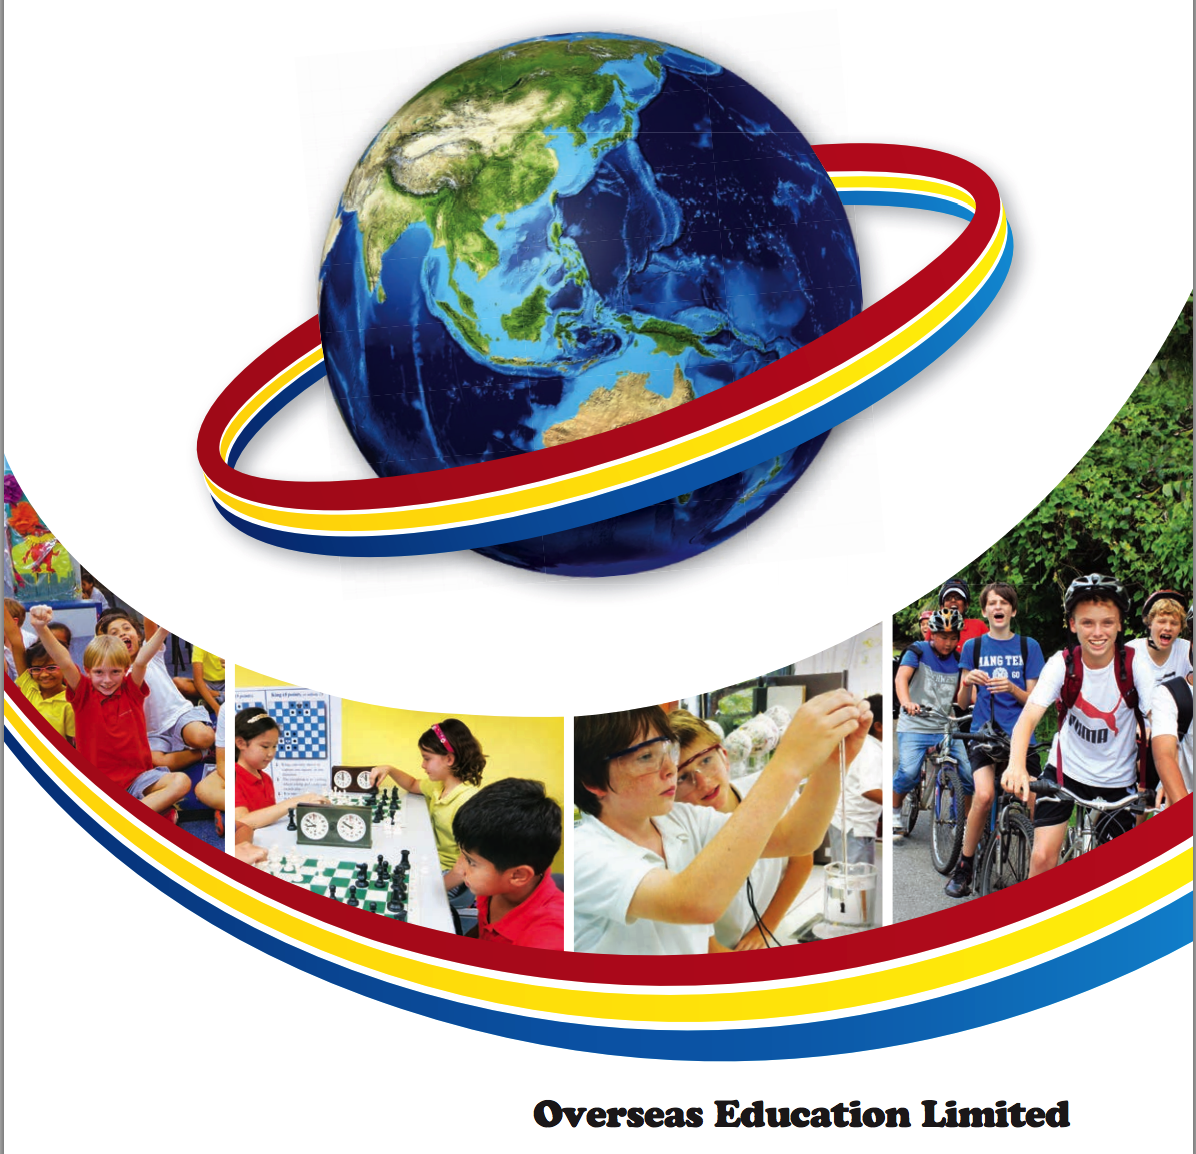 Overseas Education Ltd - Maybank Kim Eng 2015-11-12: Difficult Start to the Year